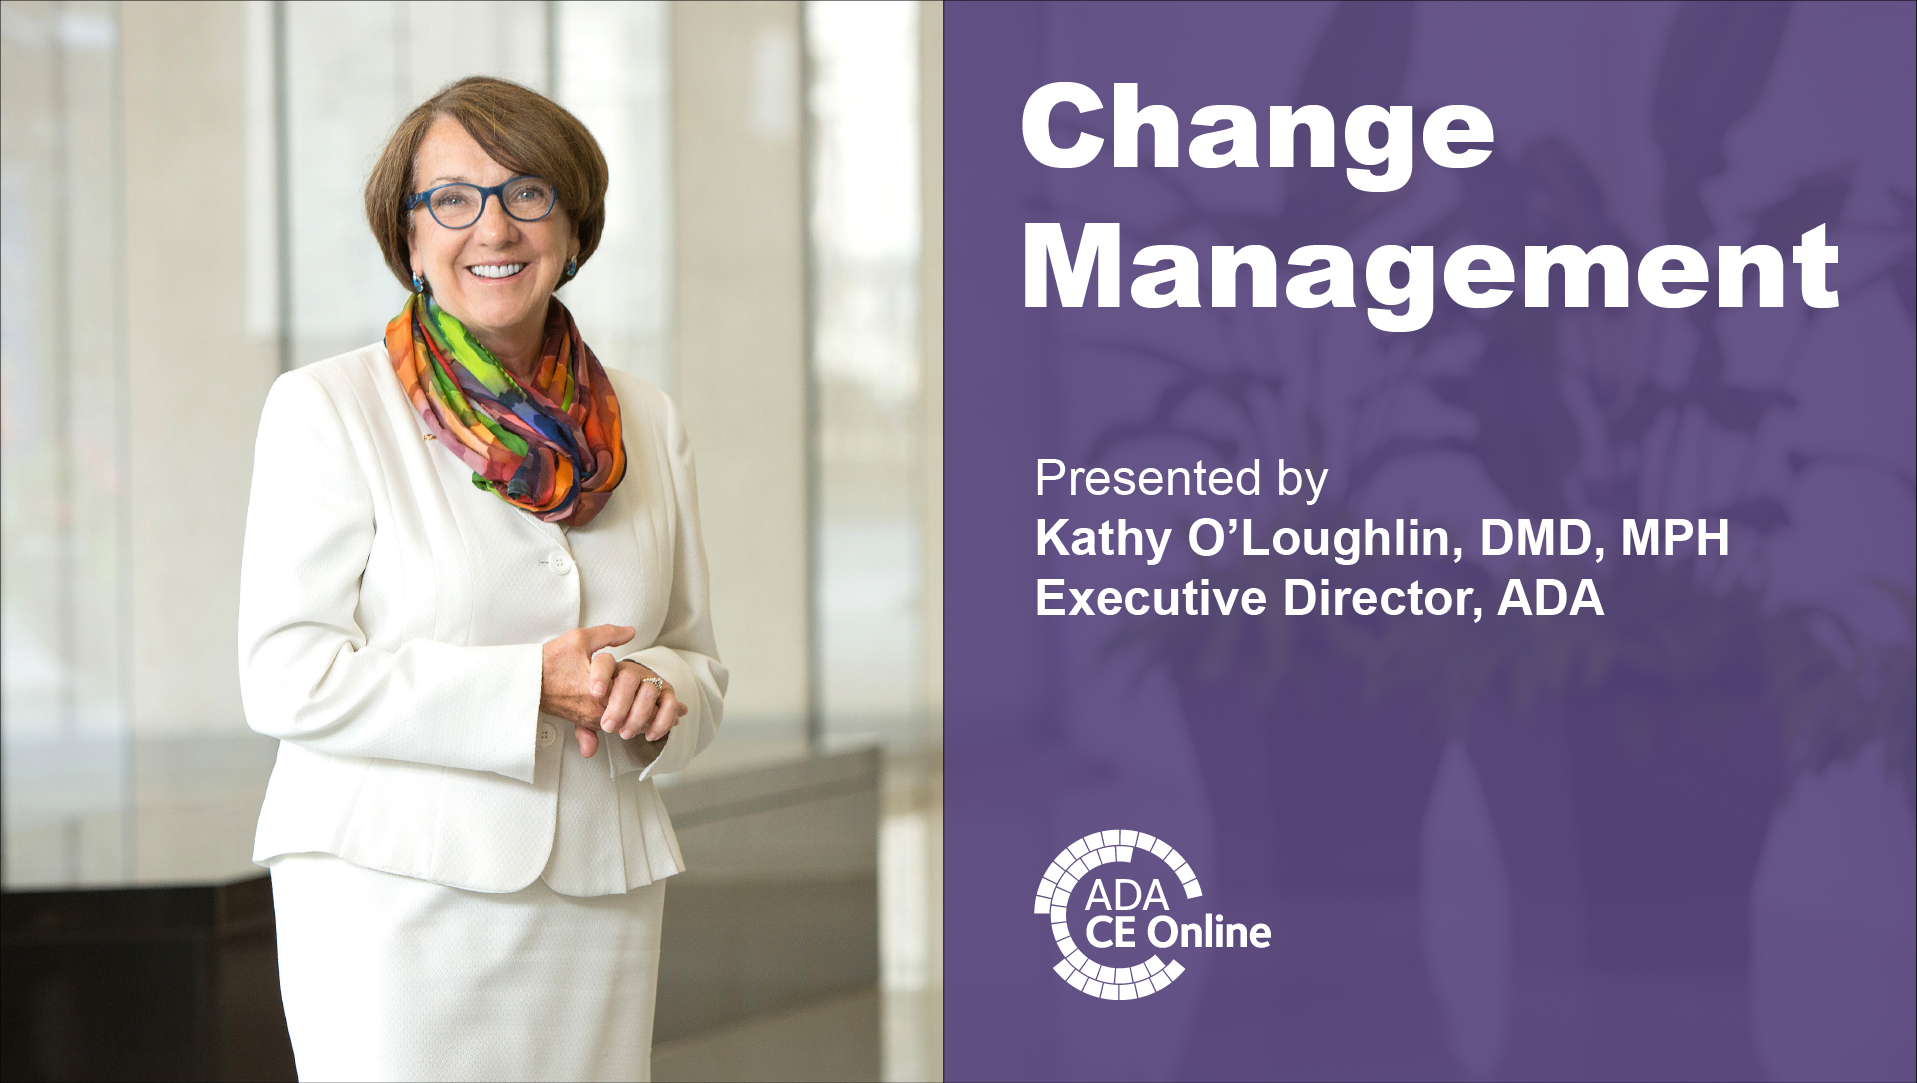 Change Management with Dr. Kathy O'Loughlin